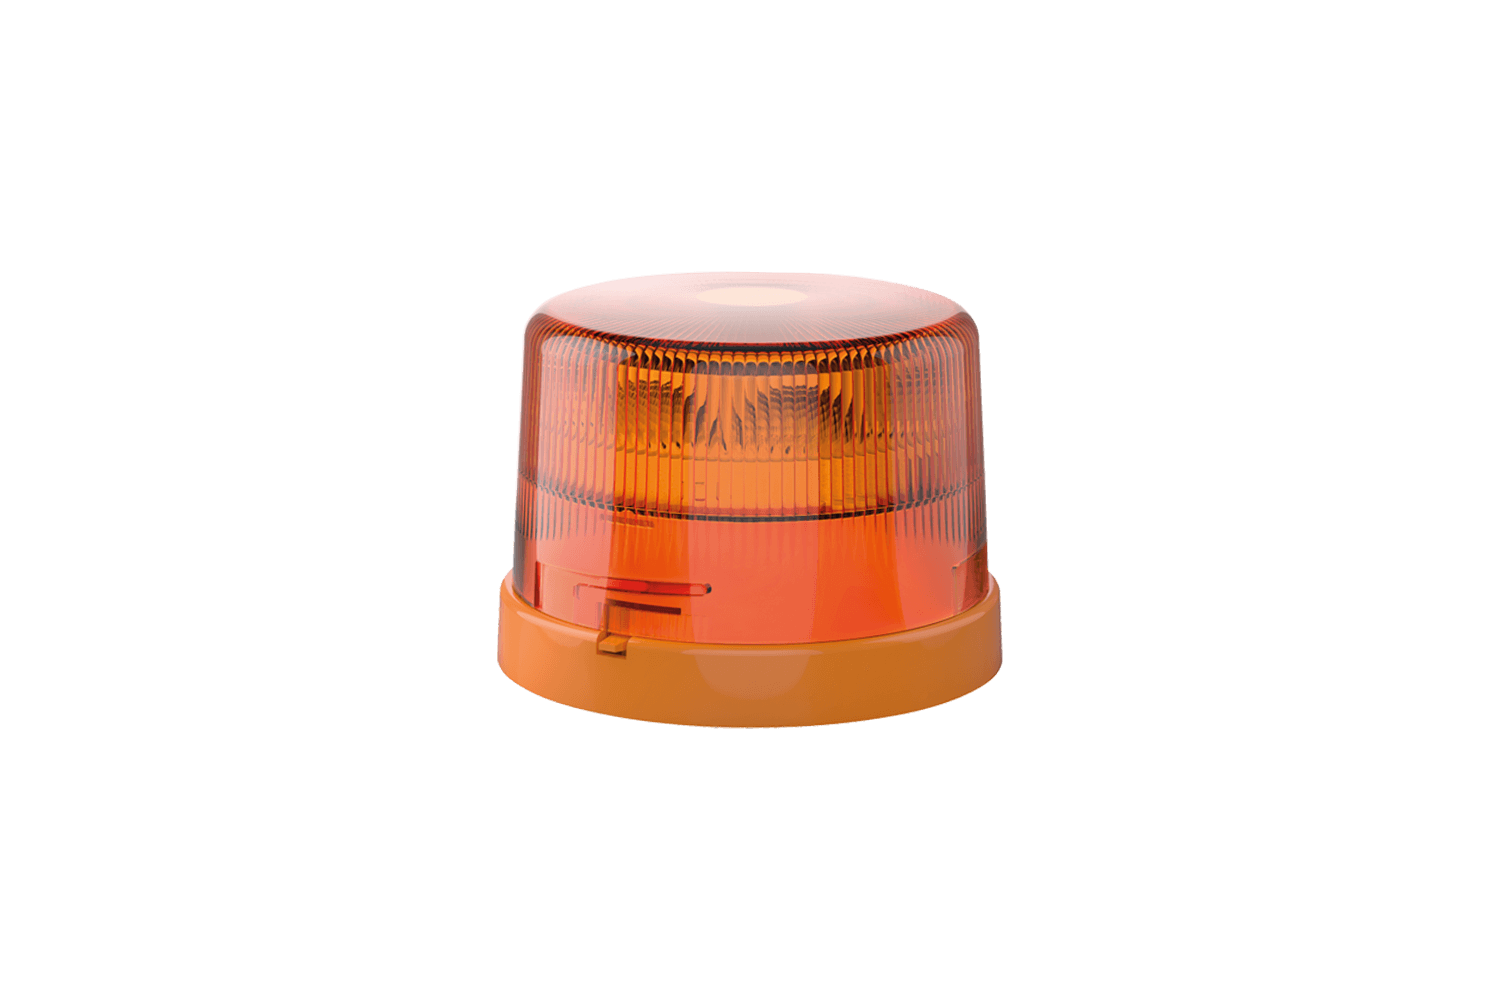 KL 7000 LED warning lamp from Hella offered by Patlon